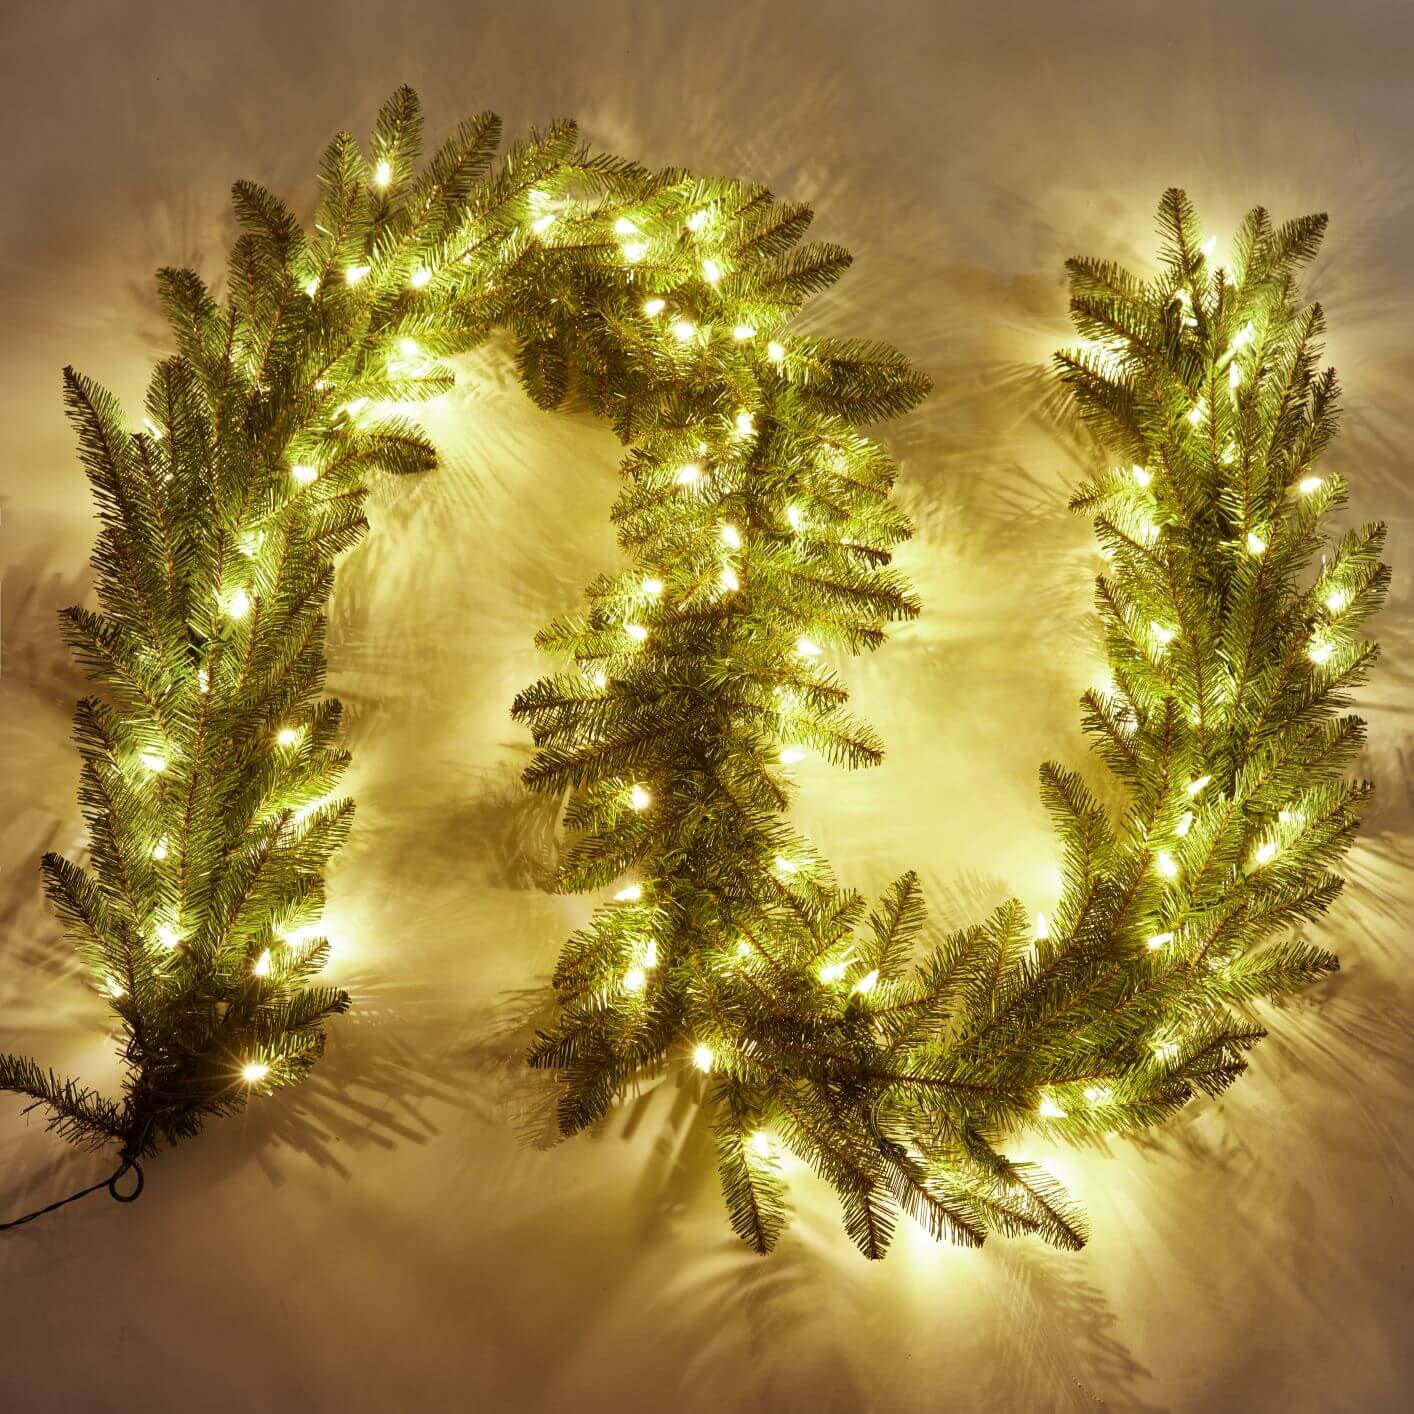 King of Christmas 9' x 12" Yorkshire Fir Garland with Warm White LED Lights (Plug Operated)